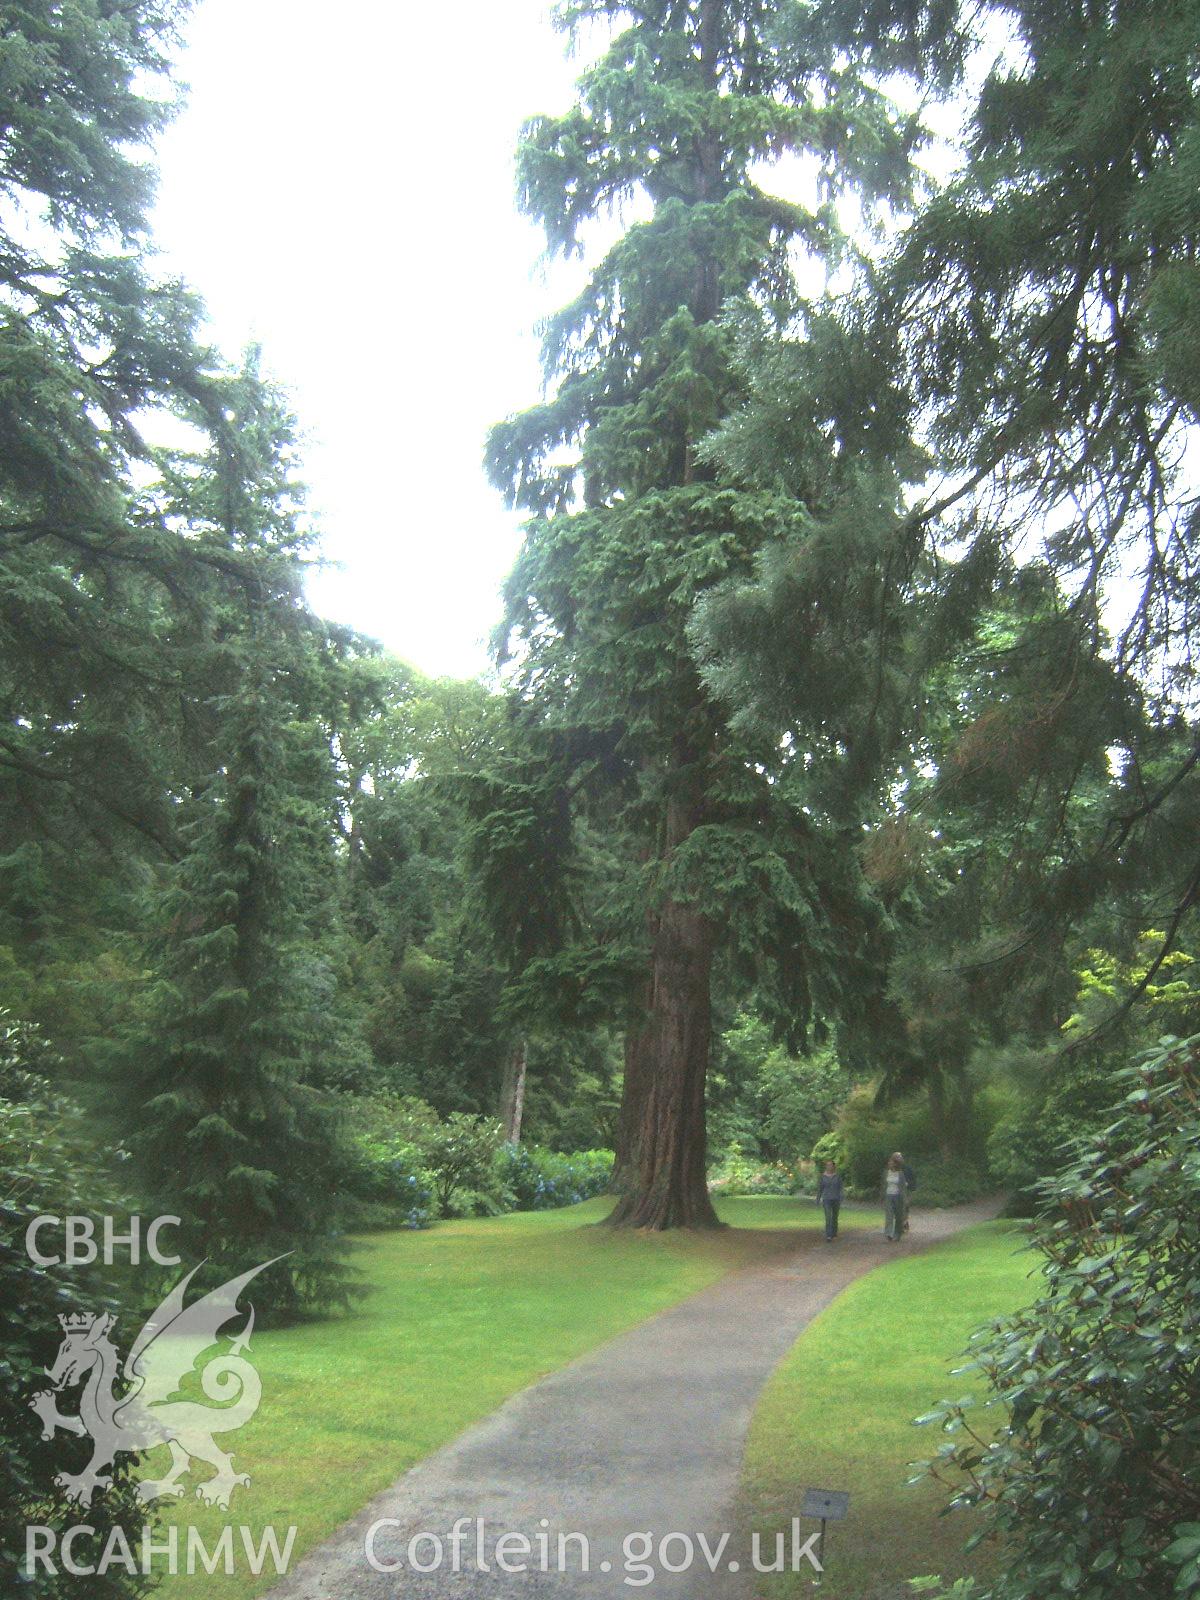 Western Hemlock or Tsuga heterophylla 44.2m (145ft) high, planted c.1886 in the Dell from the N.W..